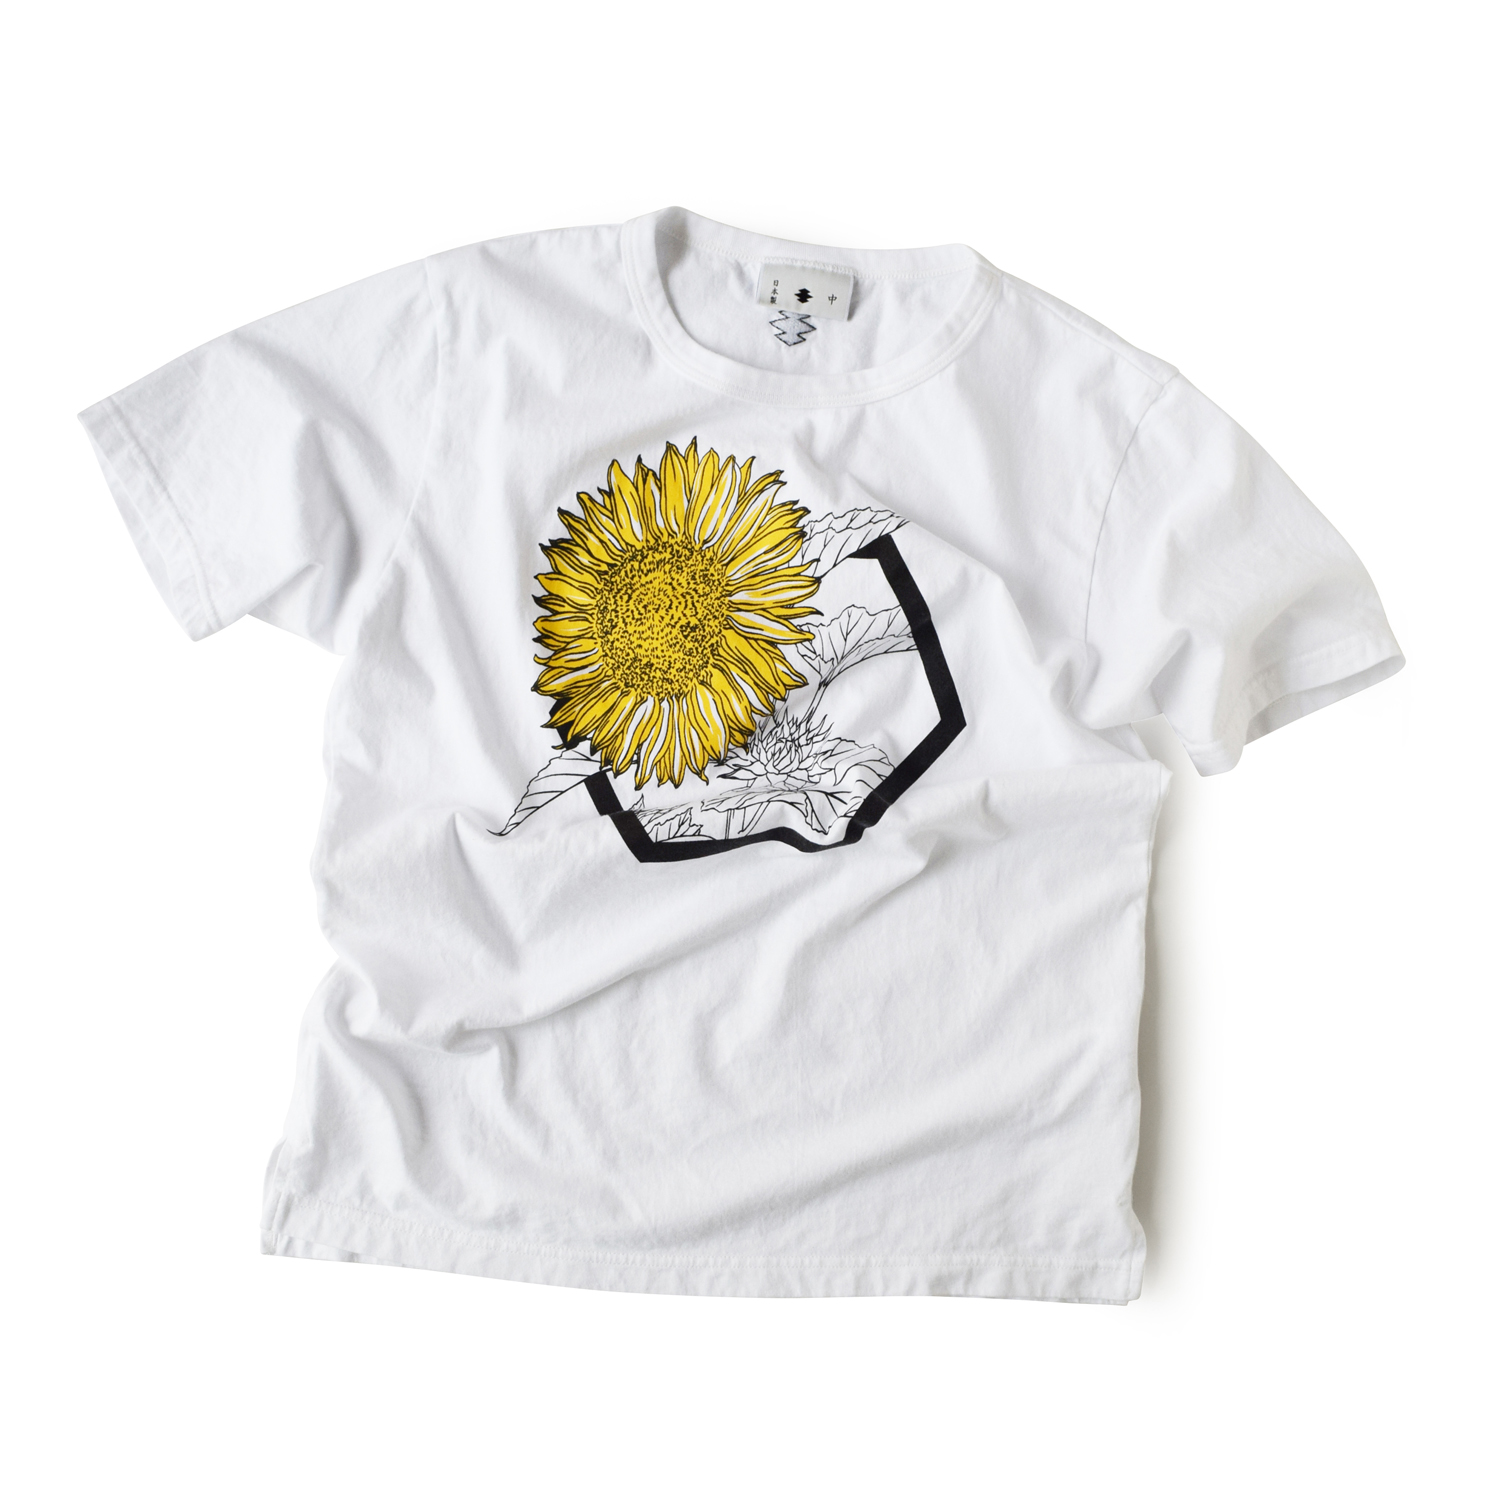 <div style="width:60px;display:inline-block;">model</div> T-shirt #84 "Sunflower"<br><div style="width:60px;display:inline-block;">color</div> white<br><div style="width:60px;display:inline-block;">material</div> cotton<br><div style="width:60px;display:inline-block;">price</div> 9,000JPY(+tax)